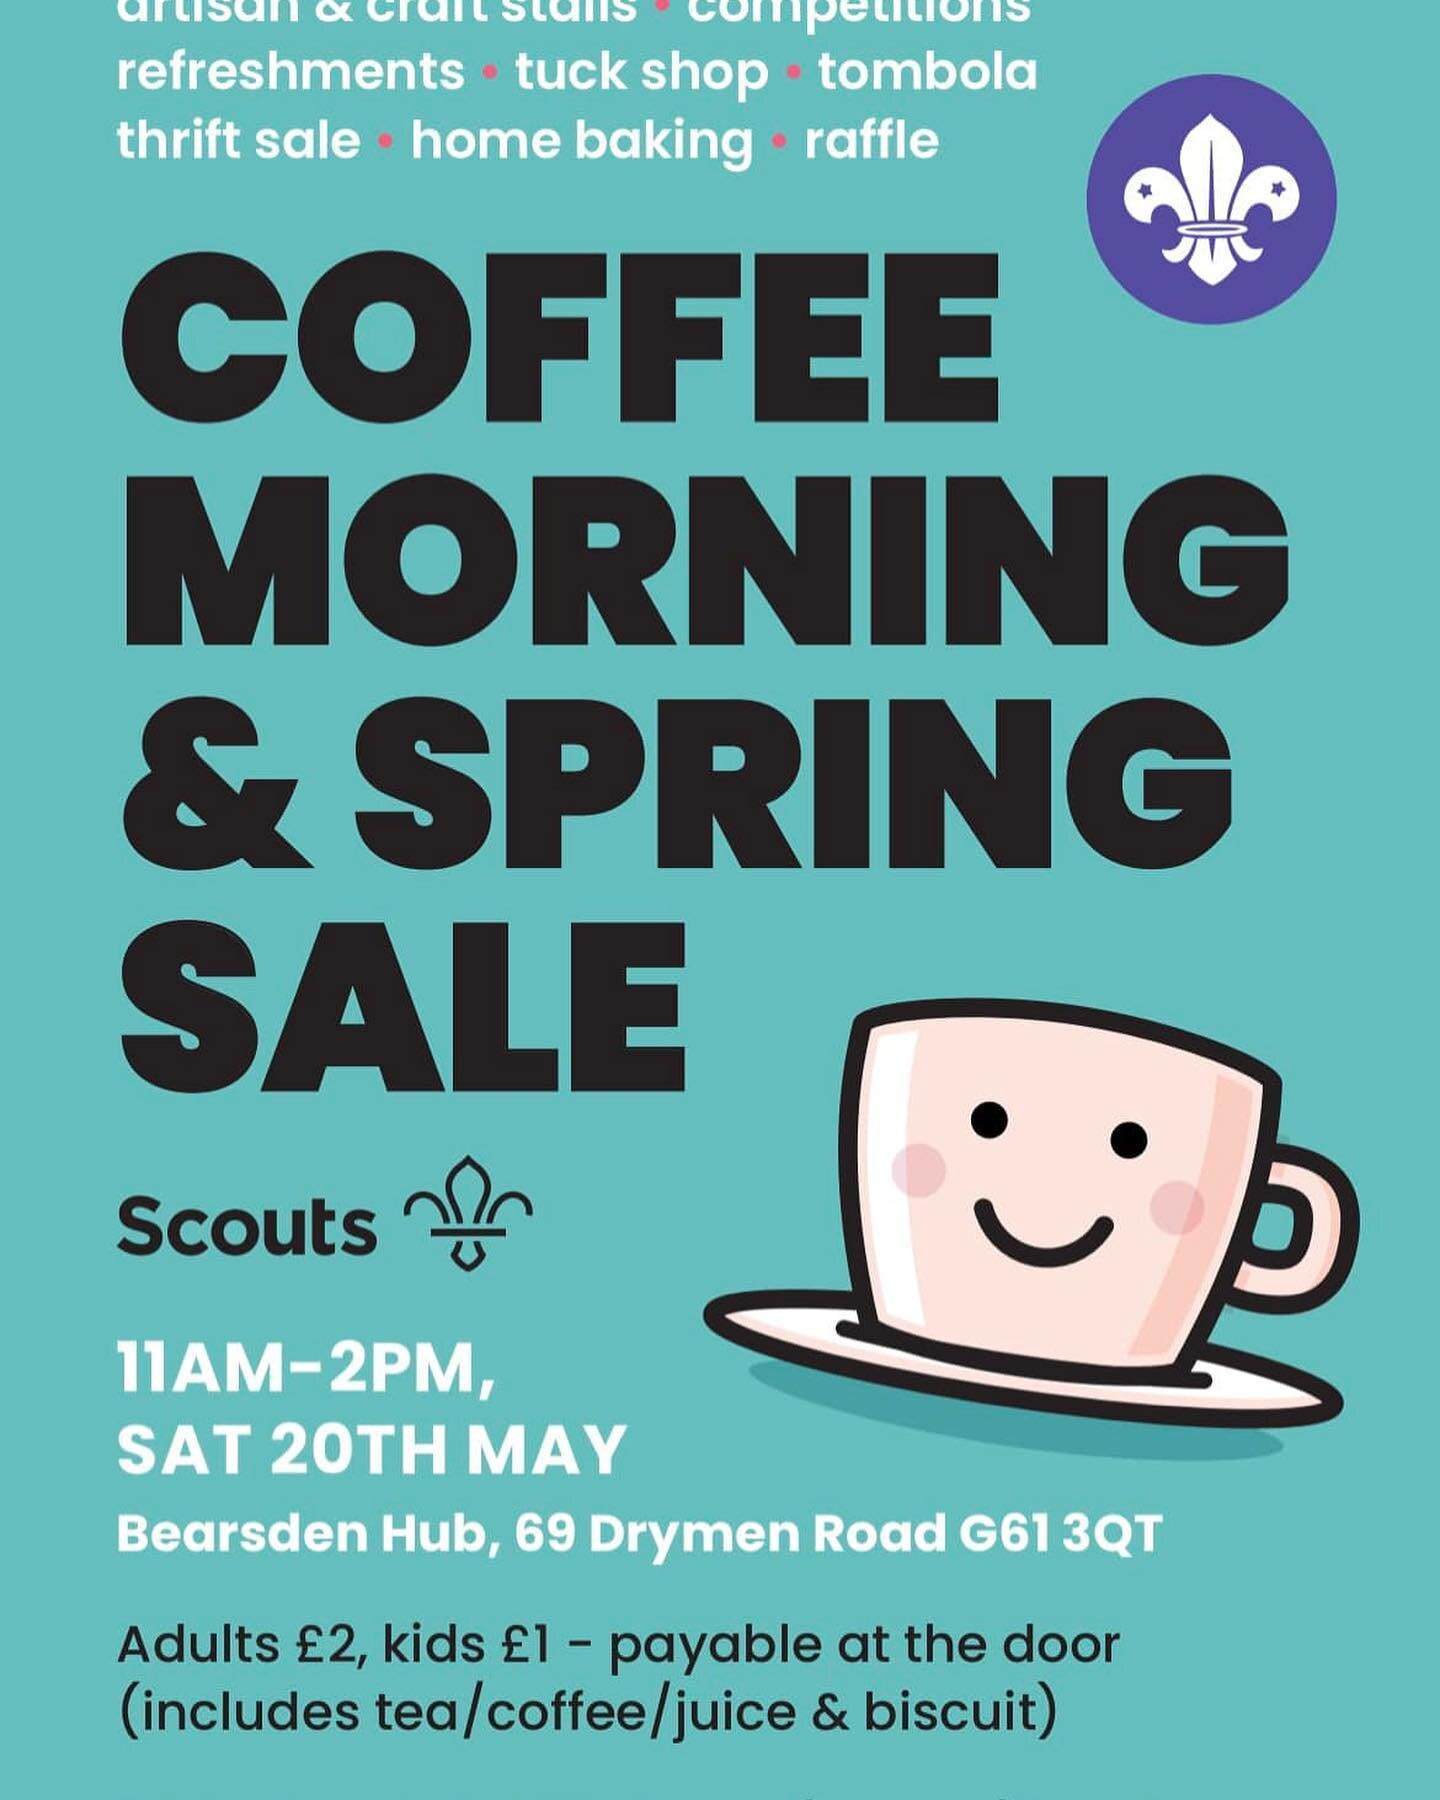 We are delighted to be attending this Spring Sale and Coffee morning tomorrow at Bearsden Hub from 11 am to 2 pm. Please pop along and show your support #staylocal #24thGlasgowScouts #fundraising #bearsden #tingtingjewellery #shoplocal